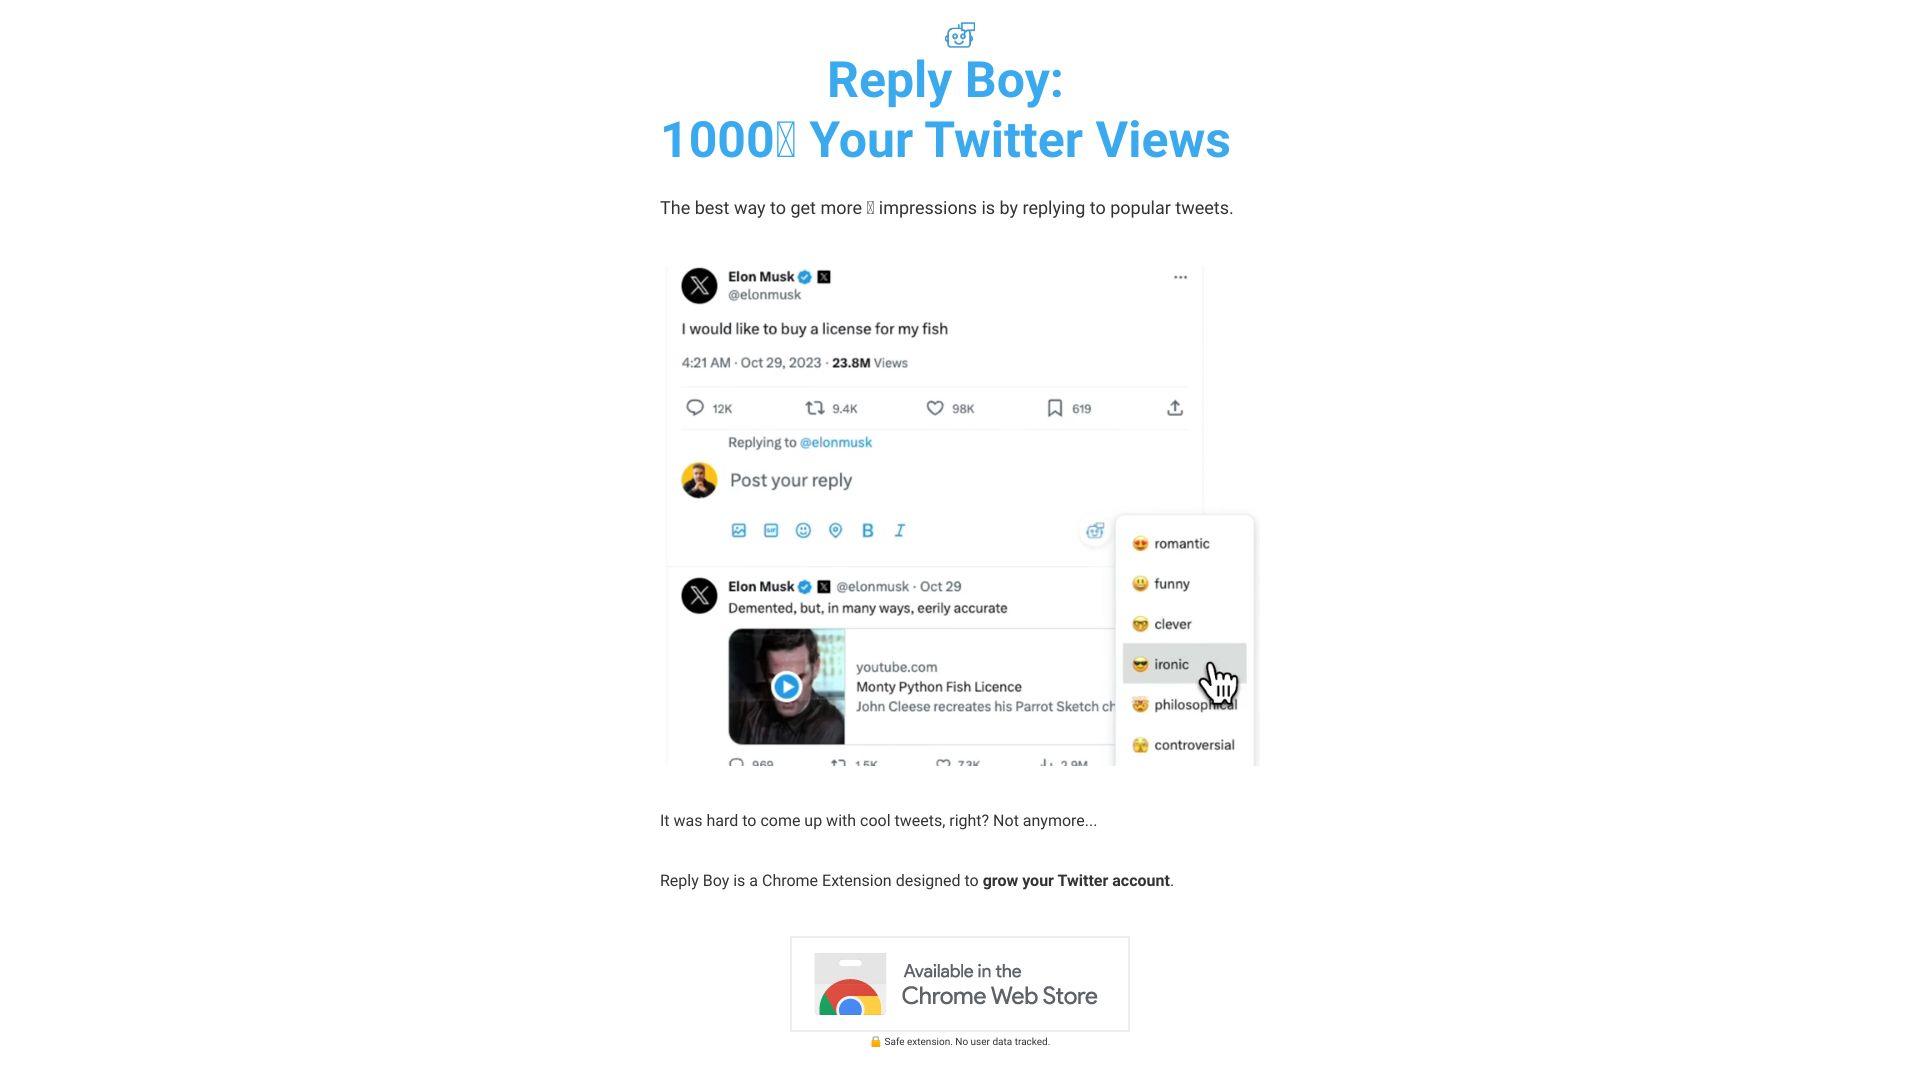 Reply Boy - 1000? Your Twitter Views